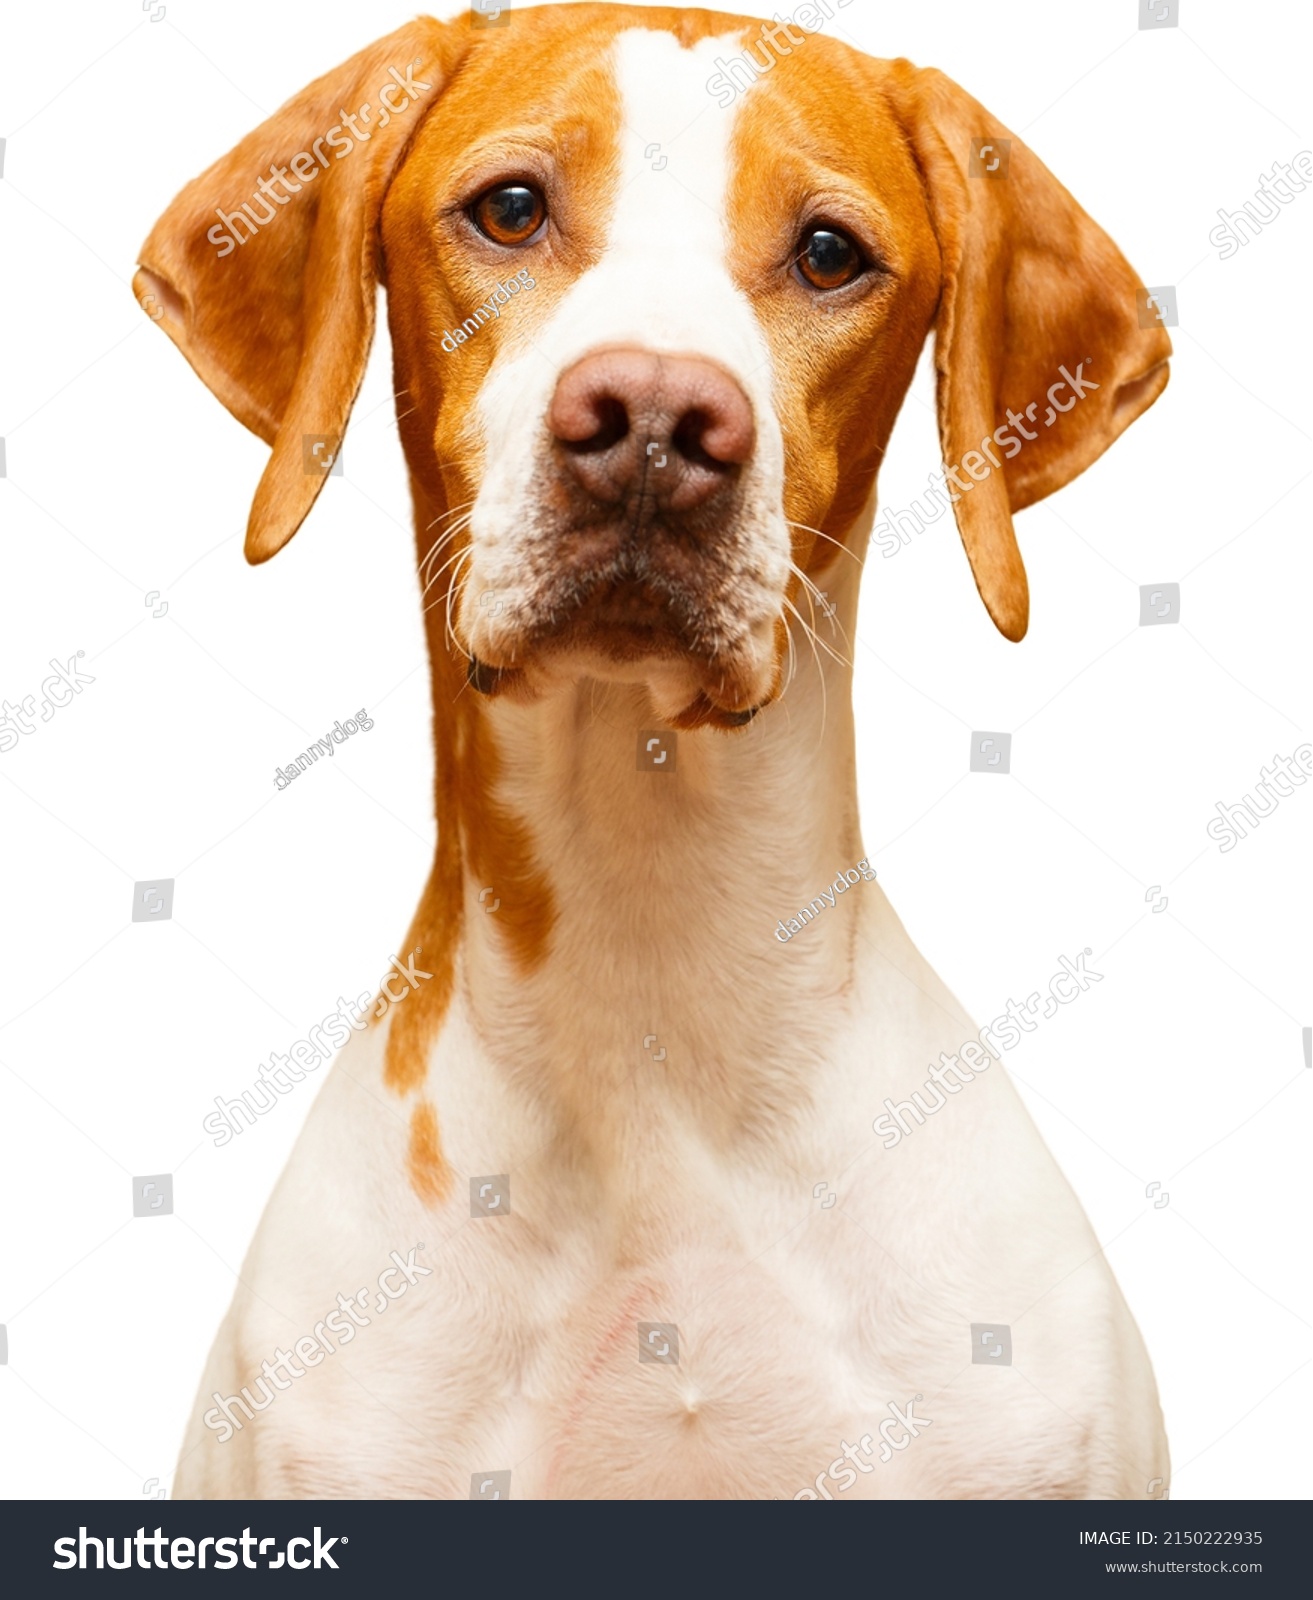 Portrait of a English Pointer dog isolated on a white background #2150222935